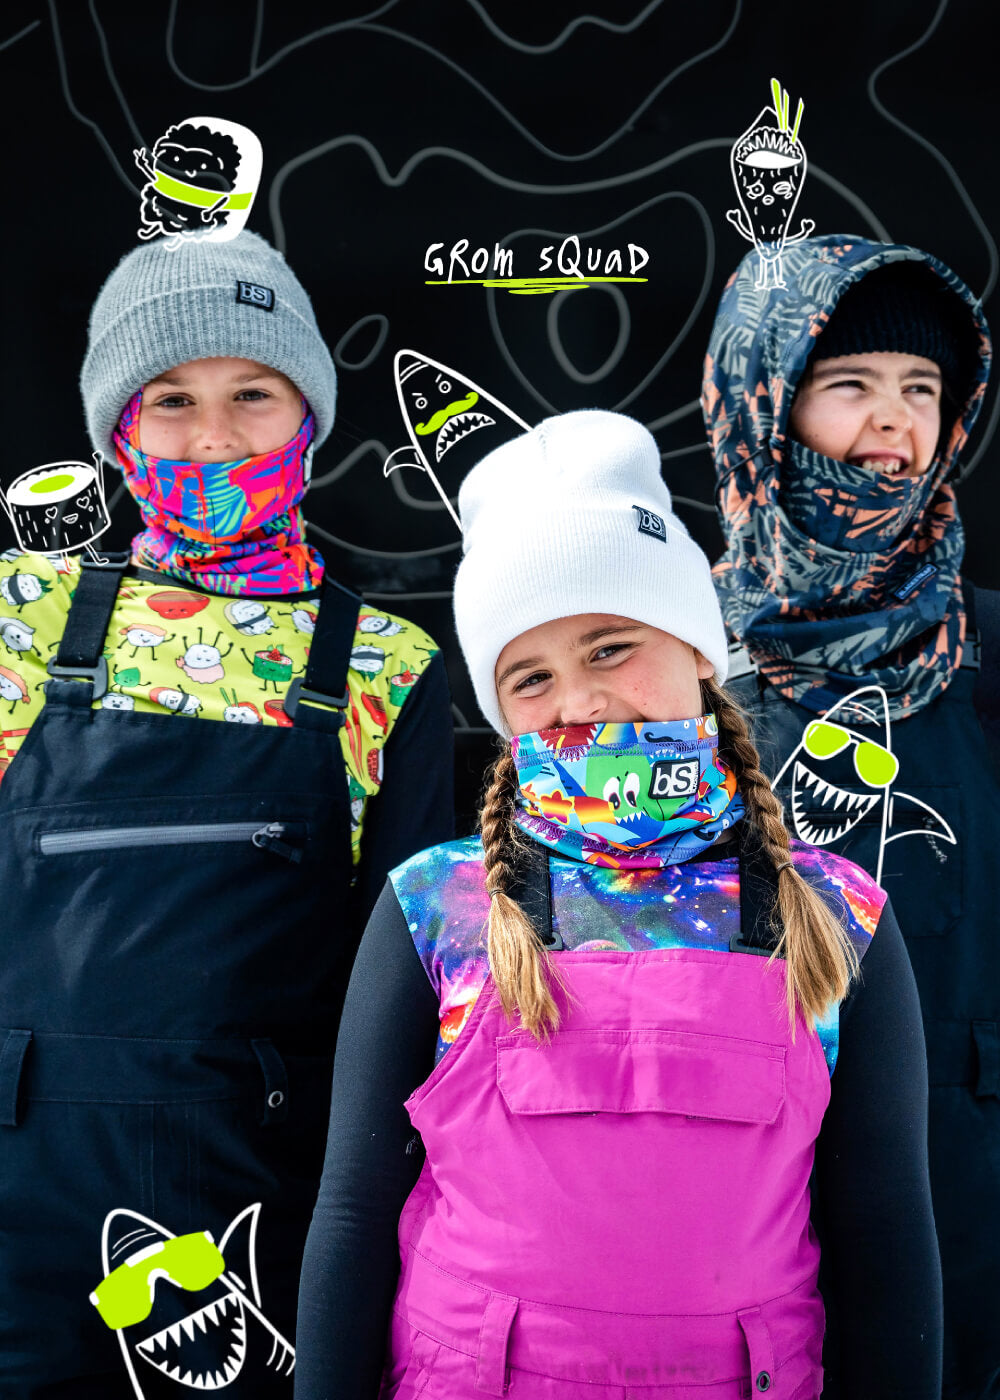 Kids Friends Collection - kids snow gear, balaclavas, base layers, and more